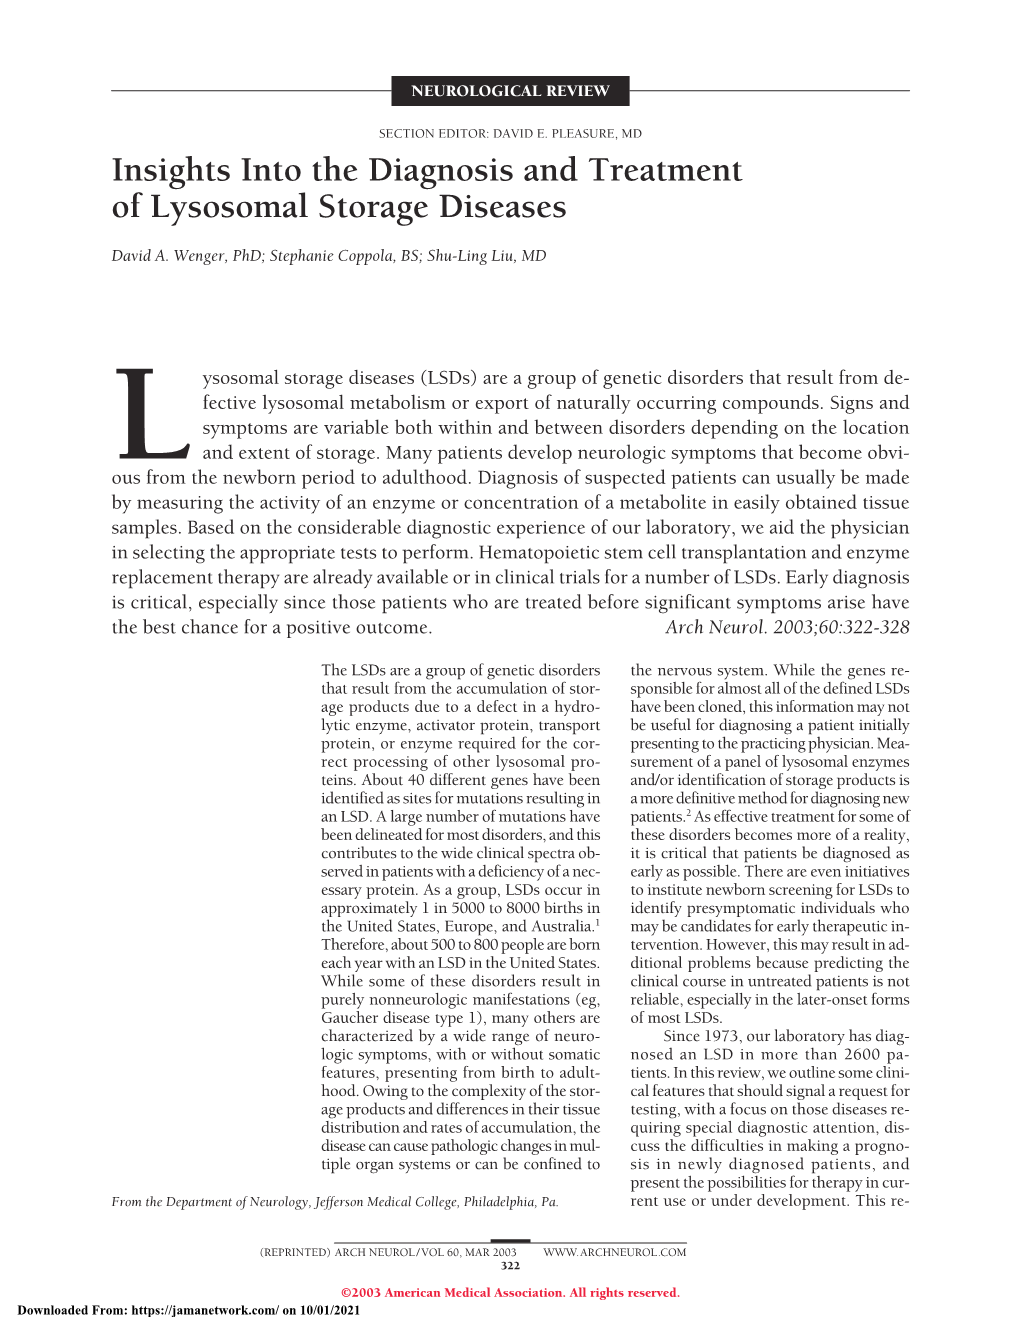 Insights Into the Diagnosis and Treatment of Lysosomal Storage Diseases